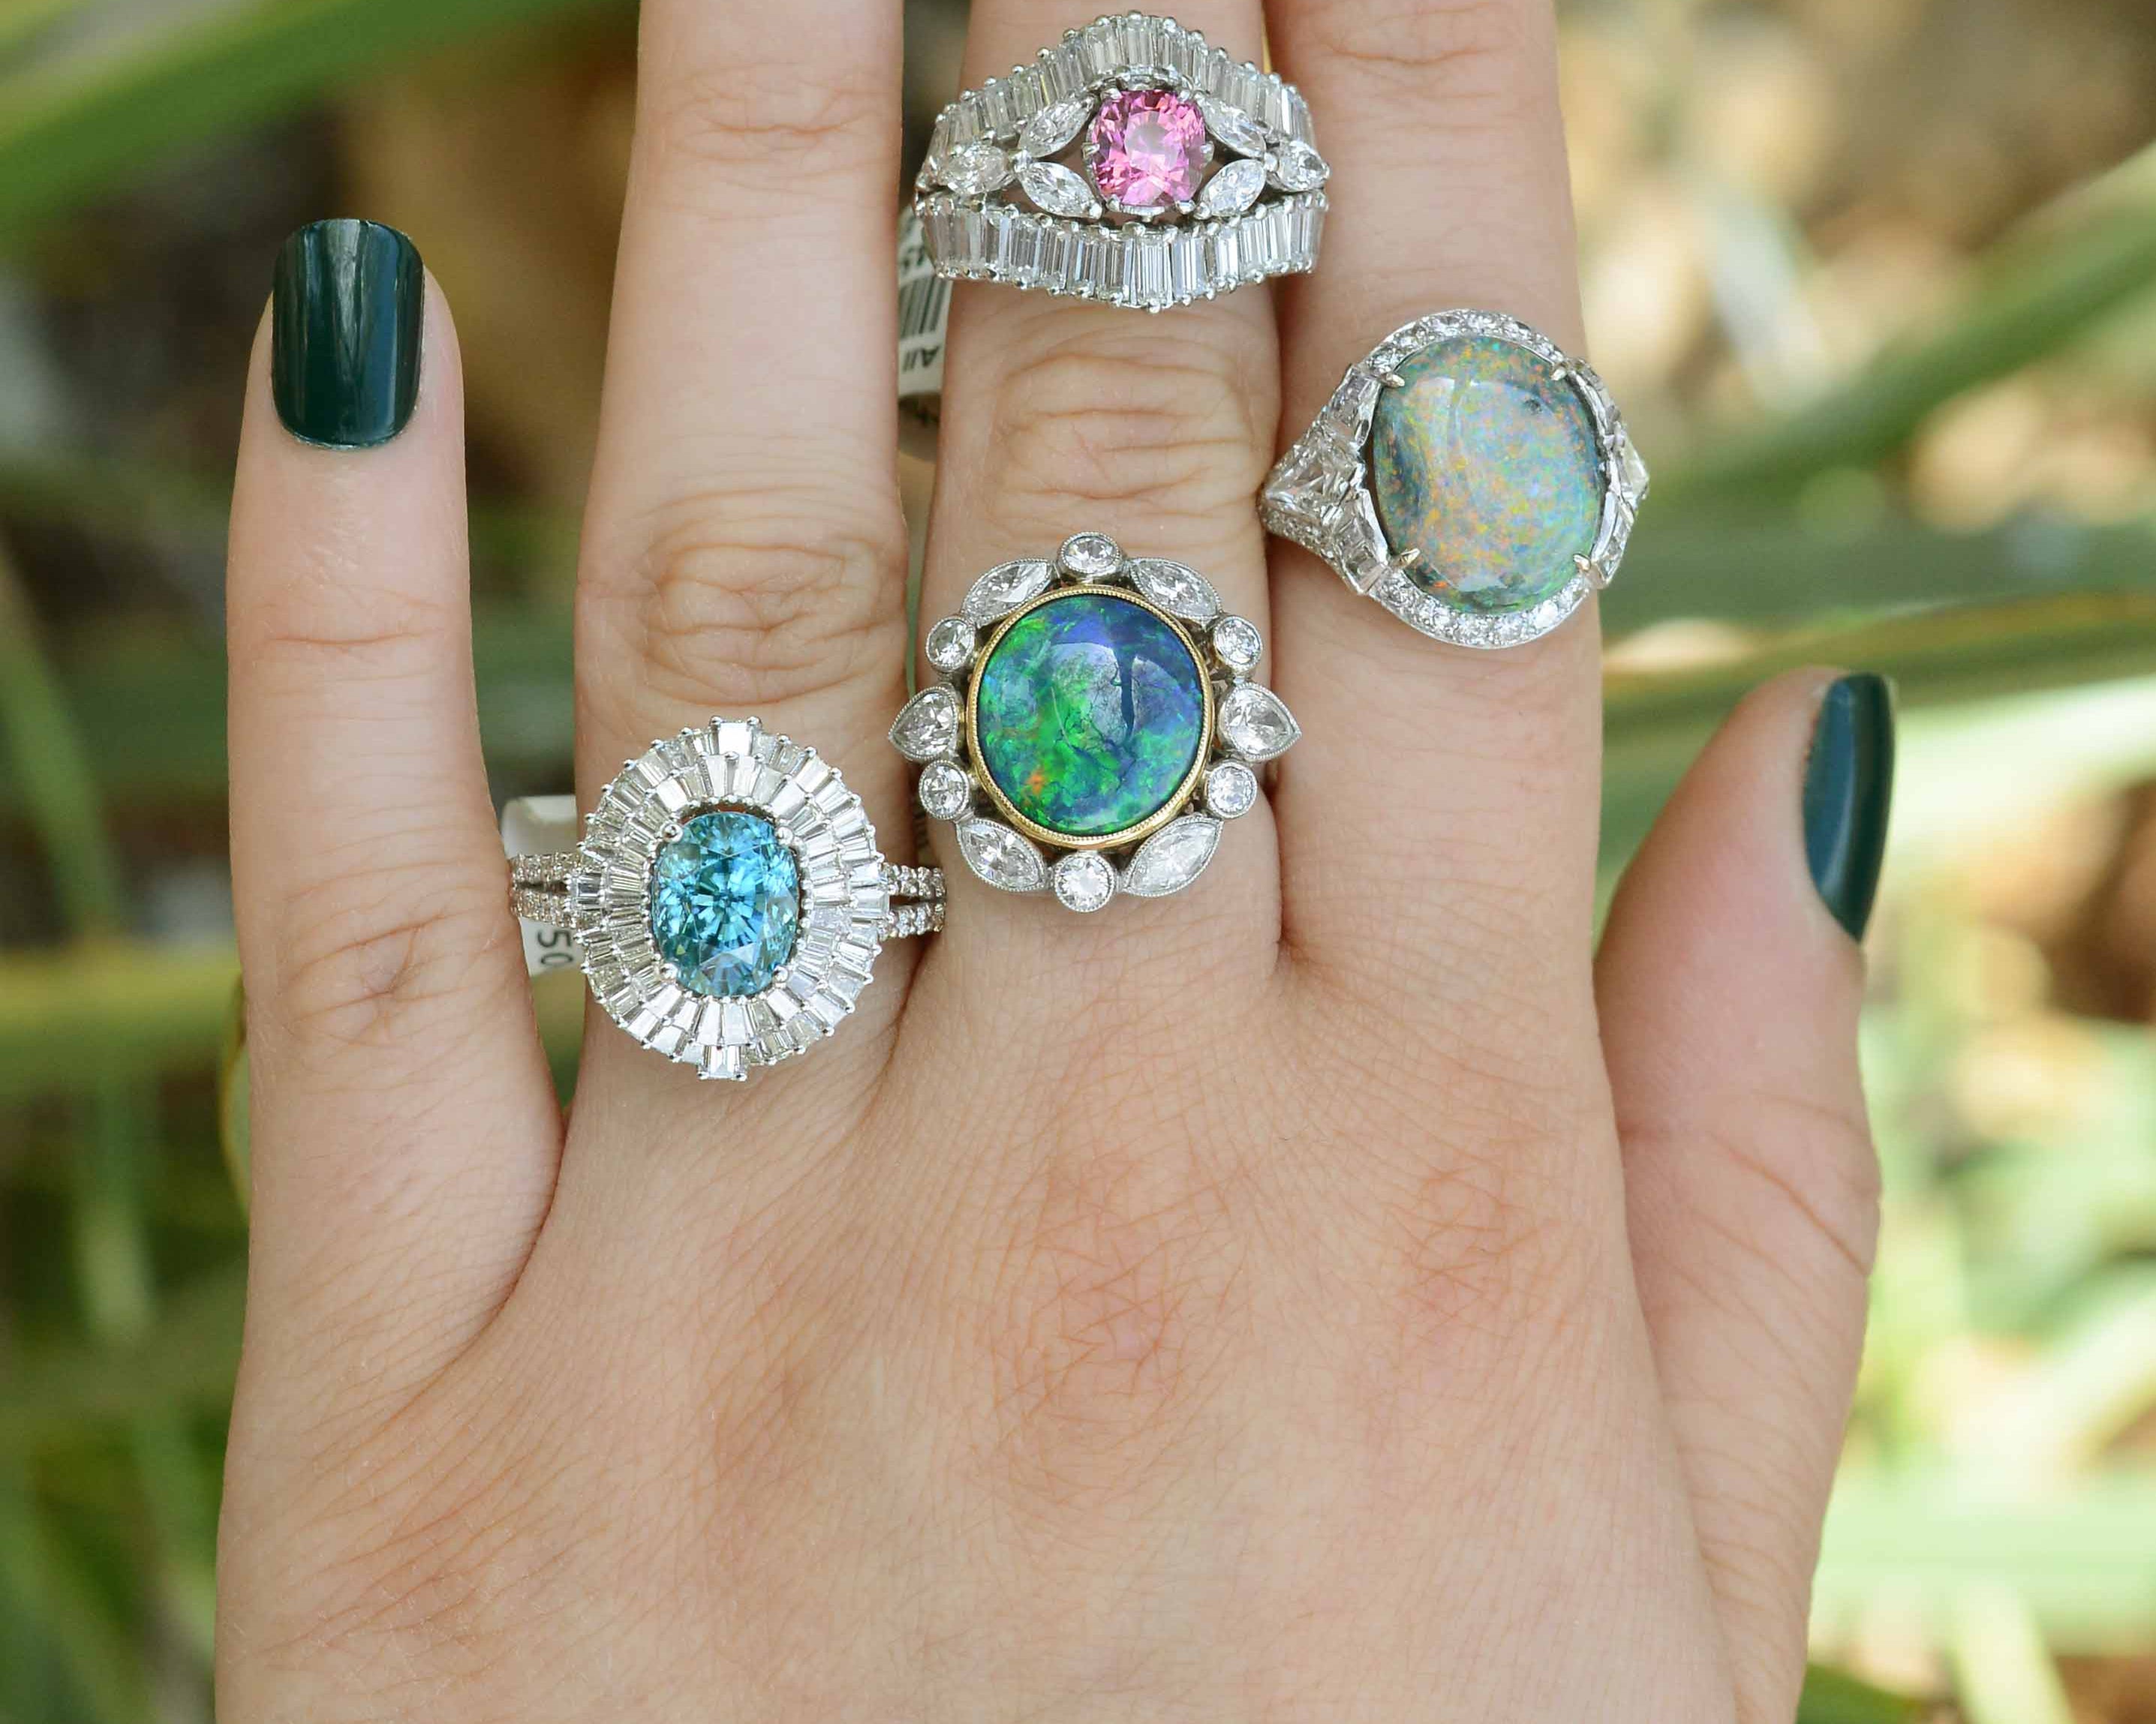 Large gem cocktail rings available from our vintage and antique estate jewelry shop.